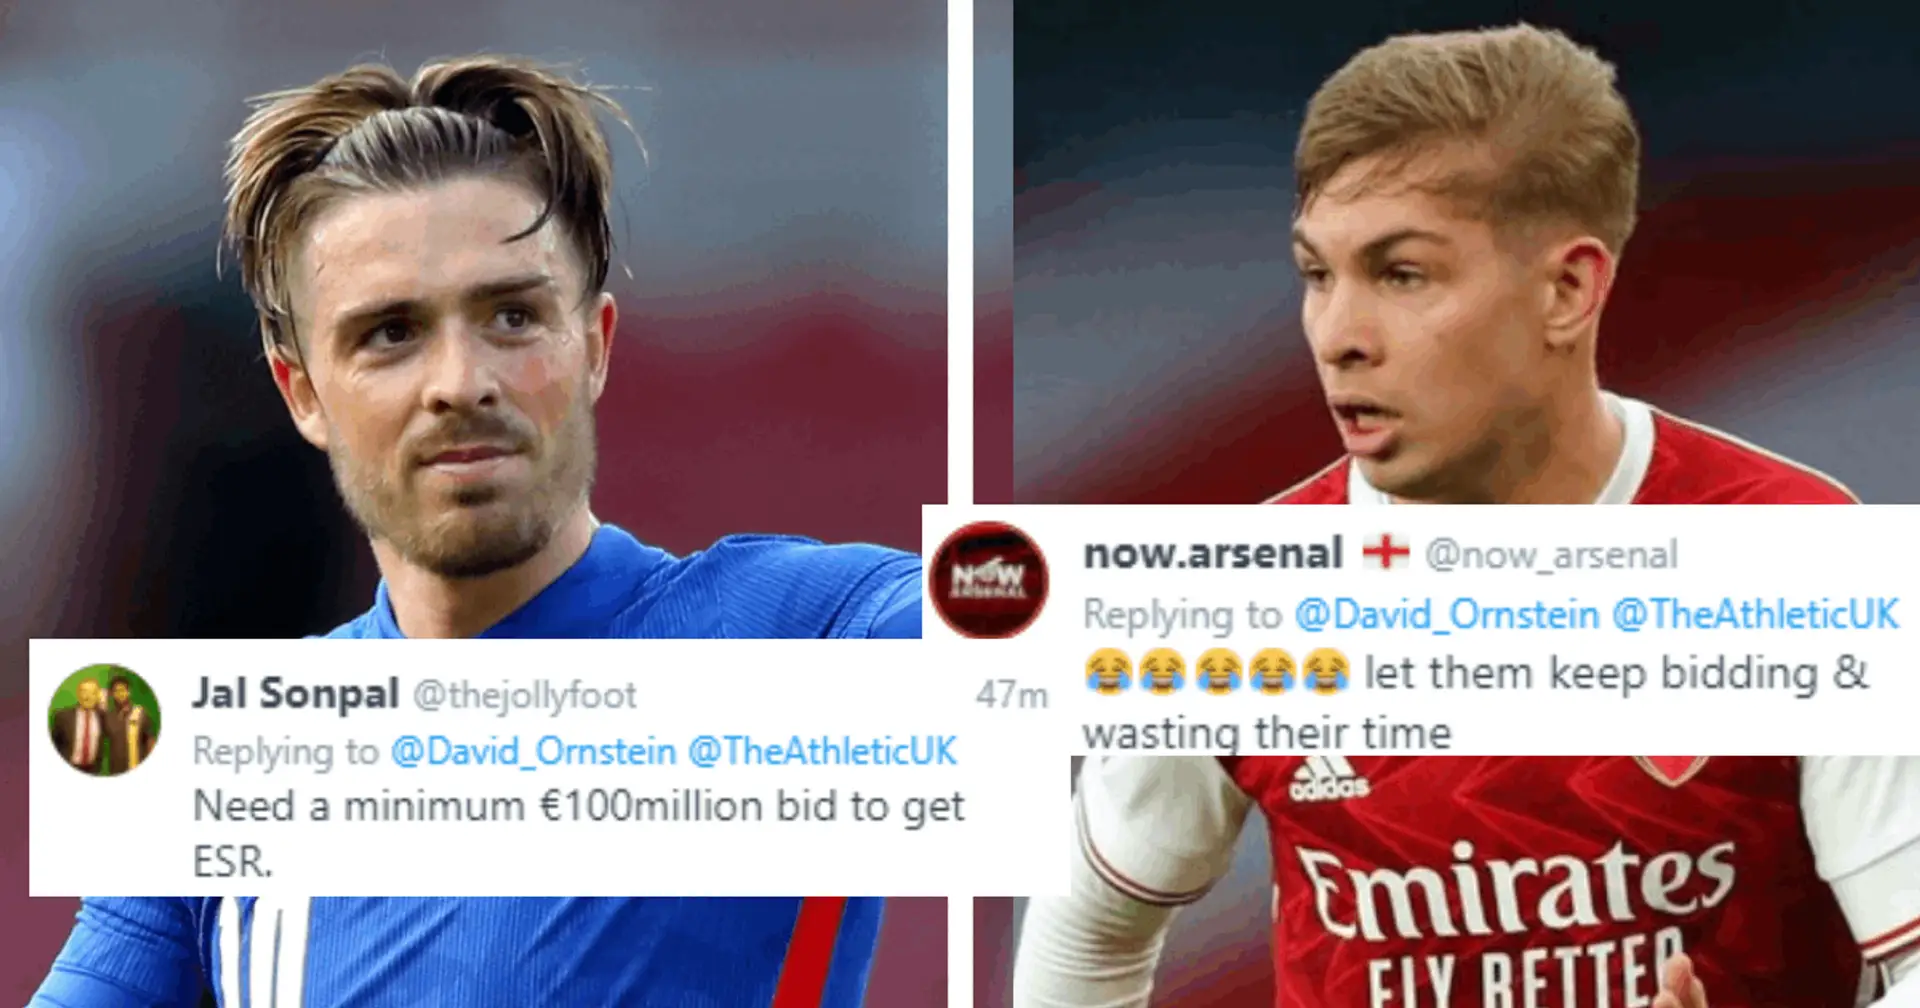 'Give us Emi back plus Grealish and we'll start chatting': Arsenal fans react to Villa's second bid for Smith Rowe